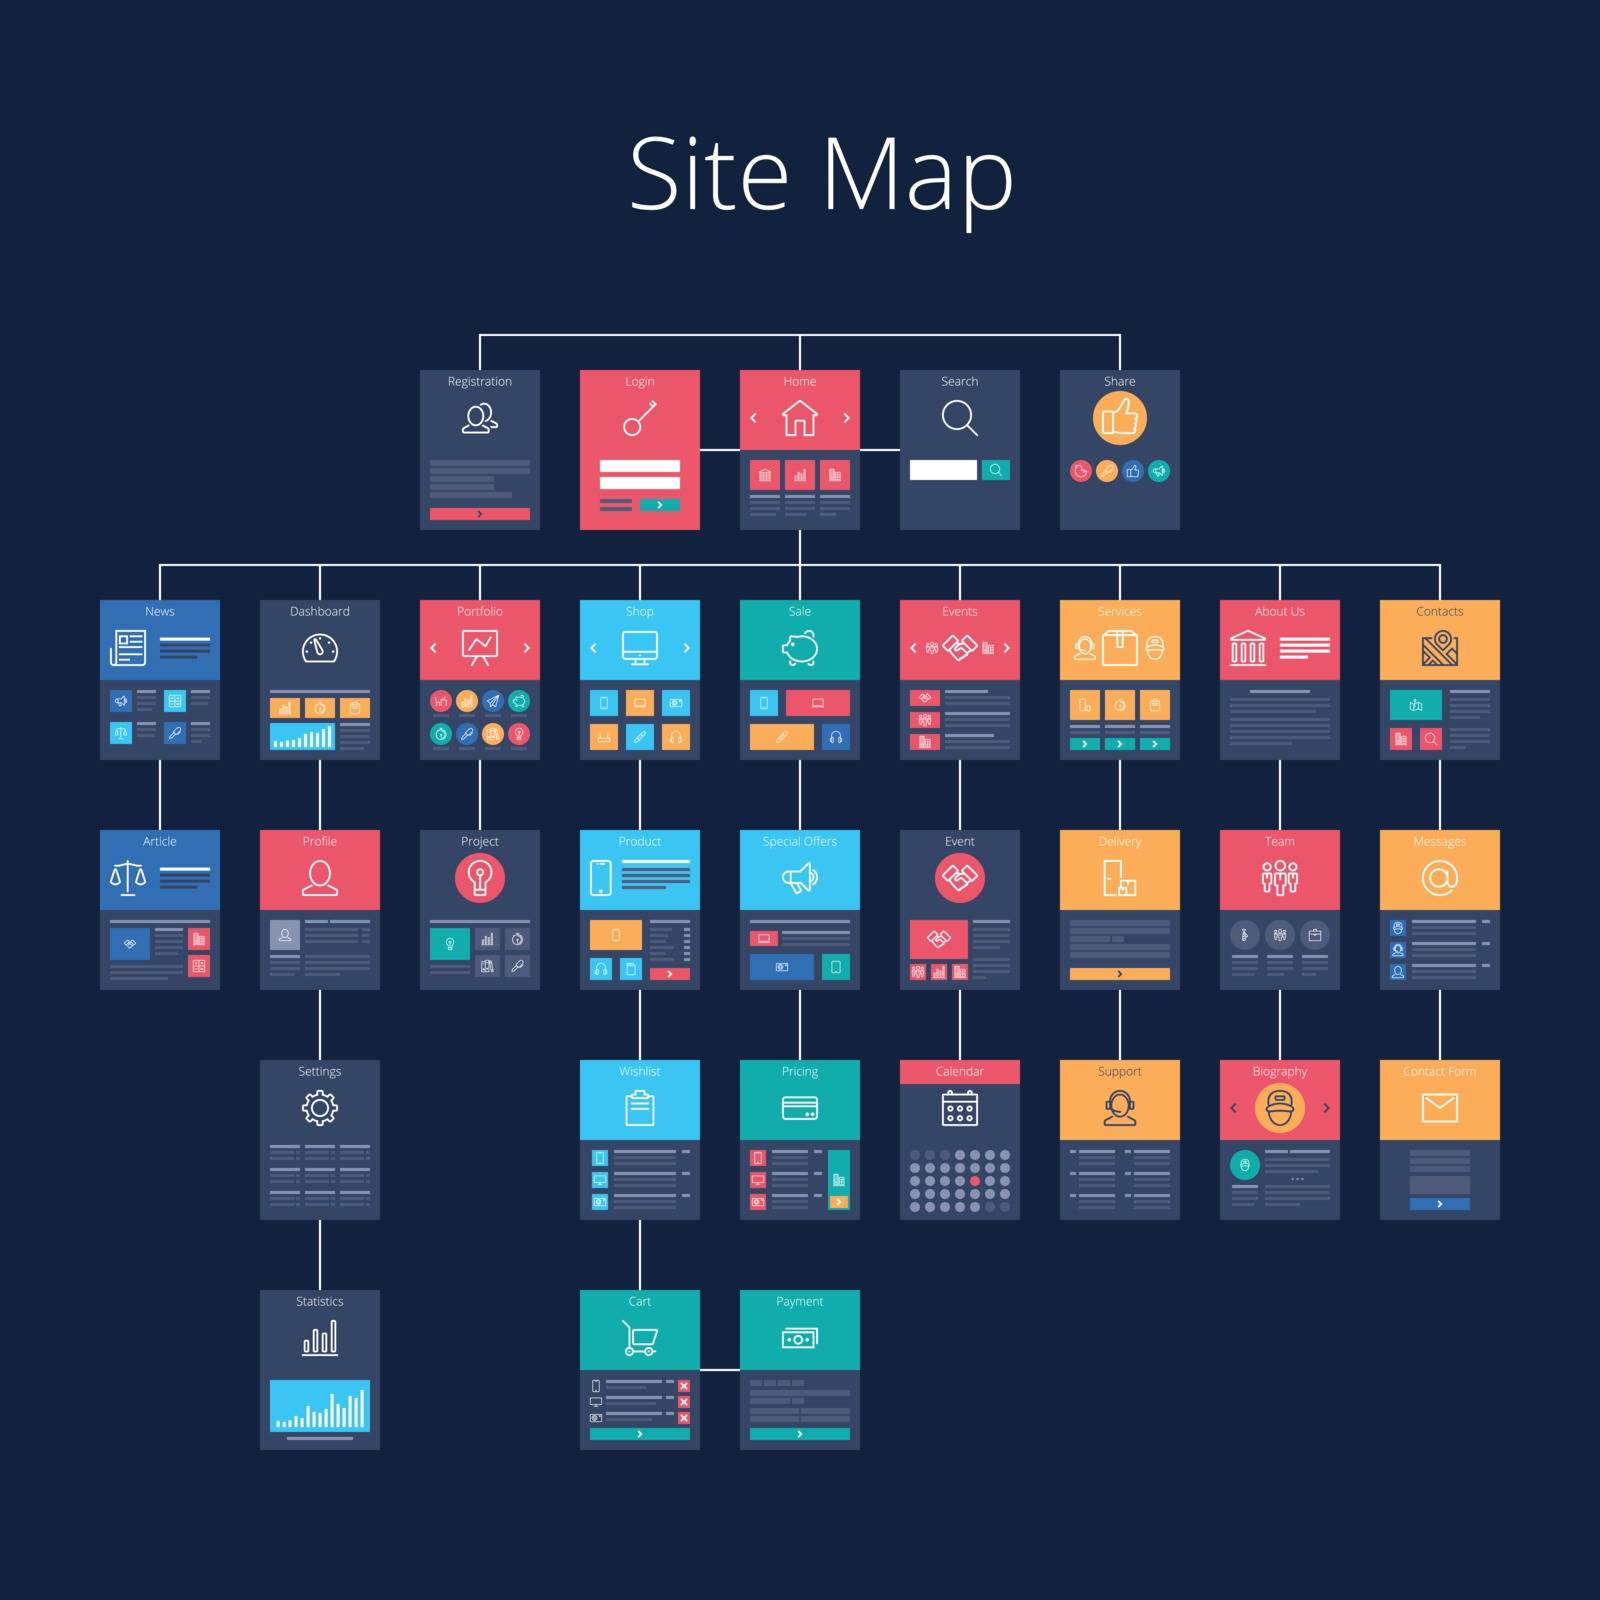 Site Map by Anatoly